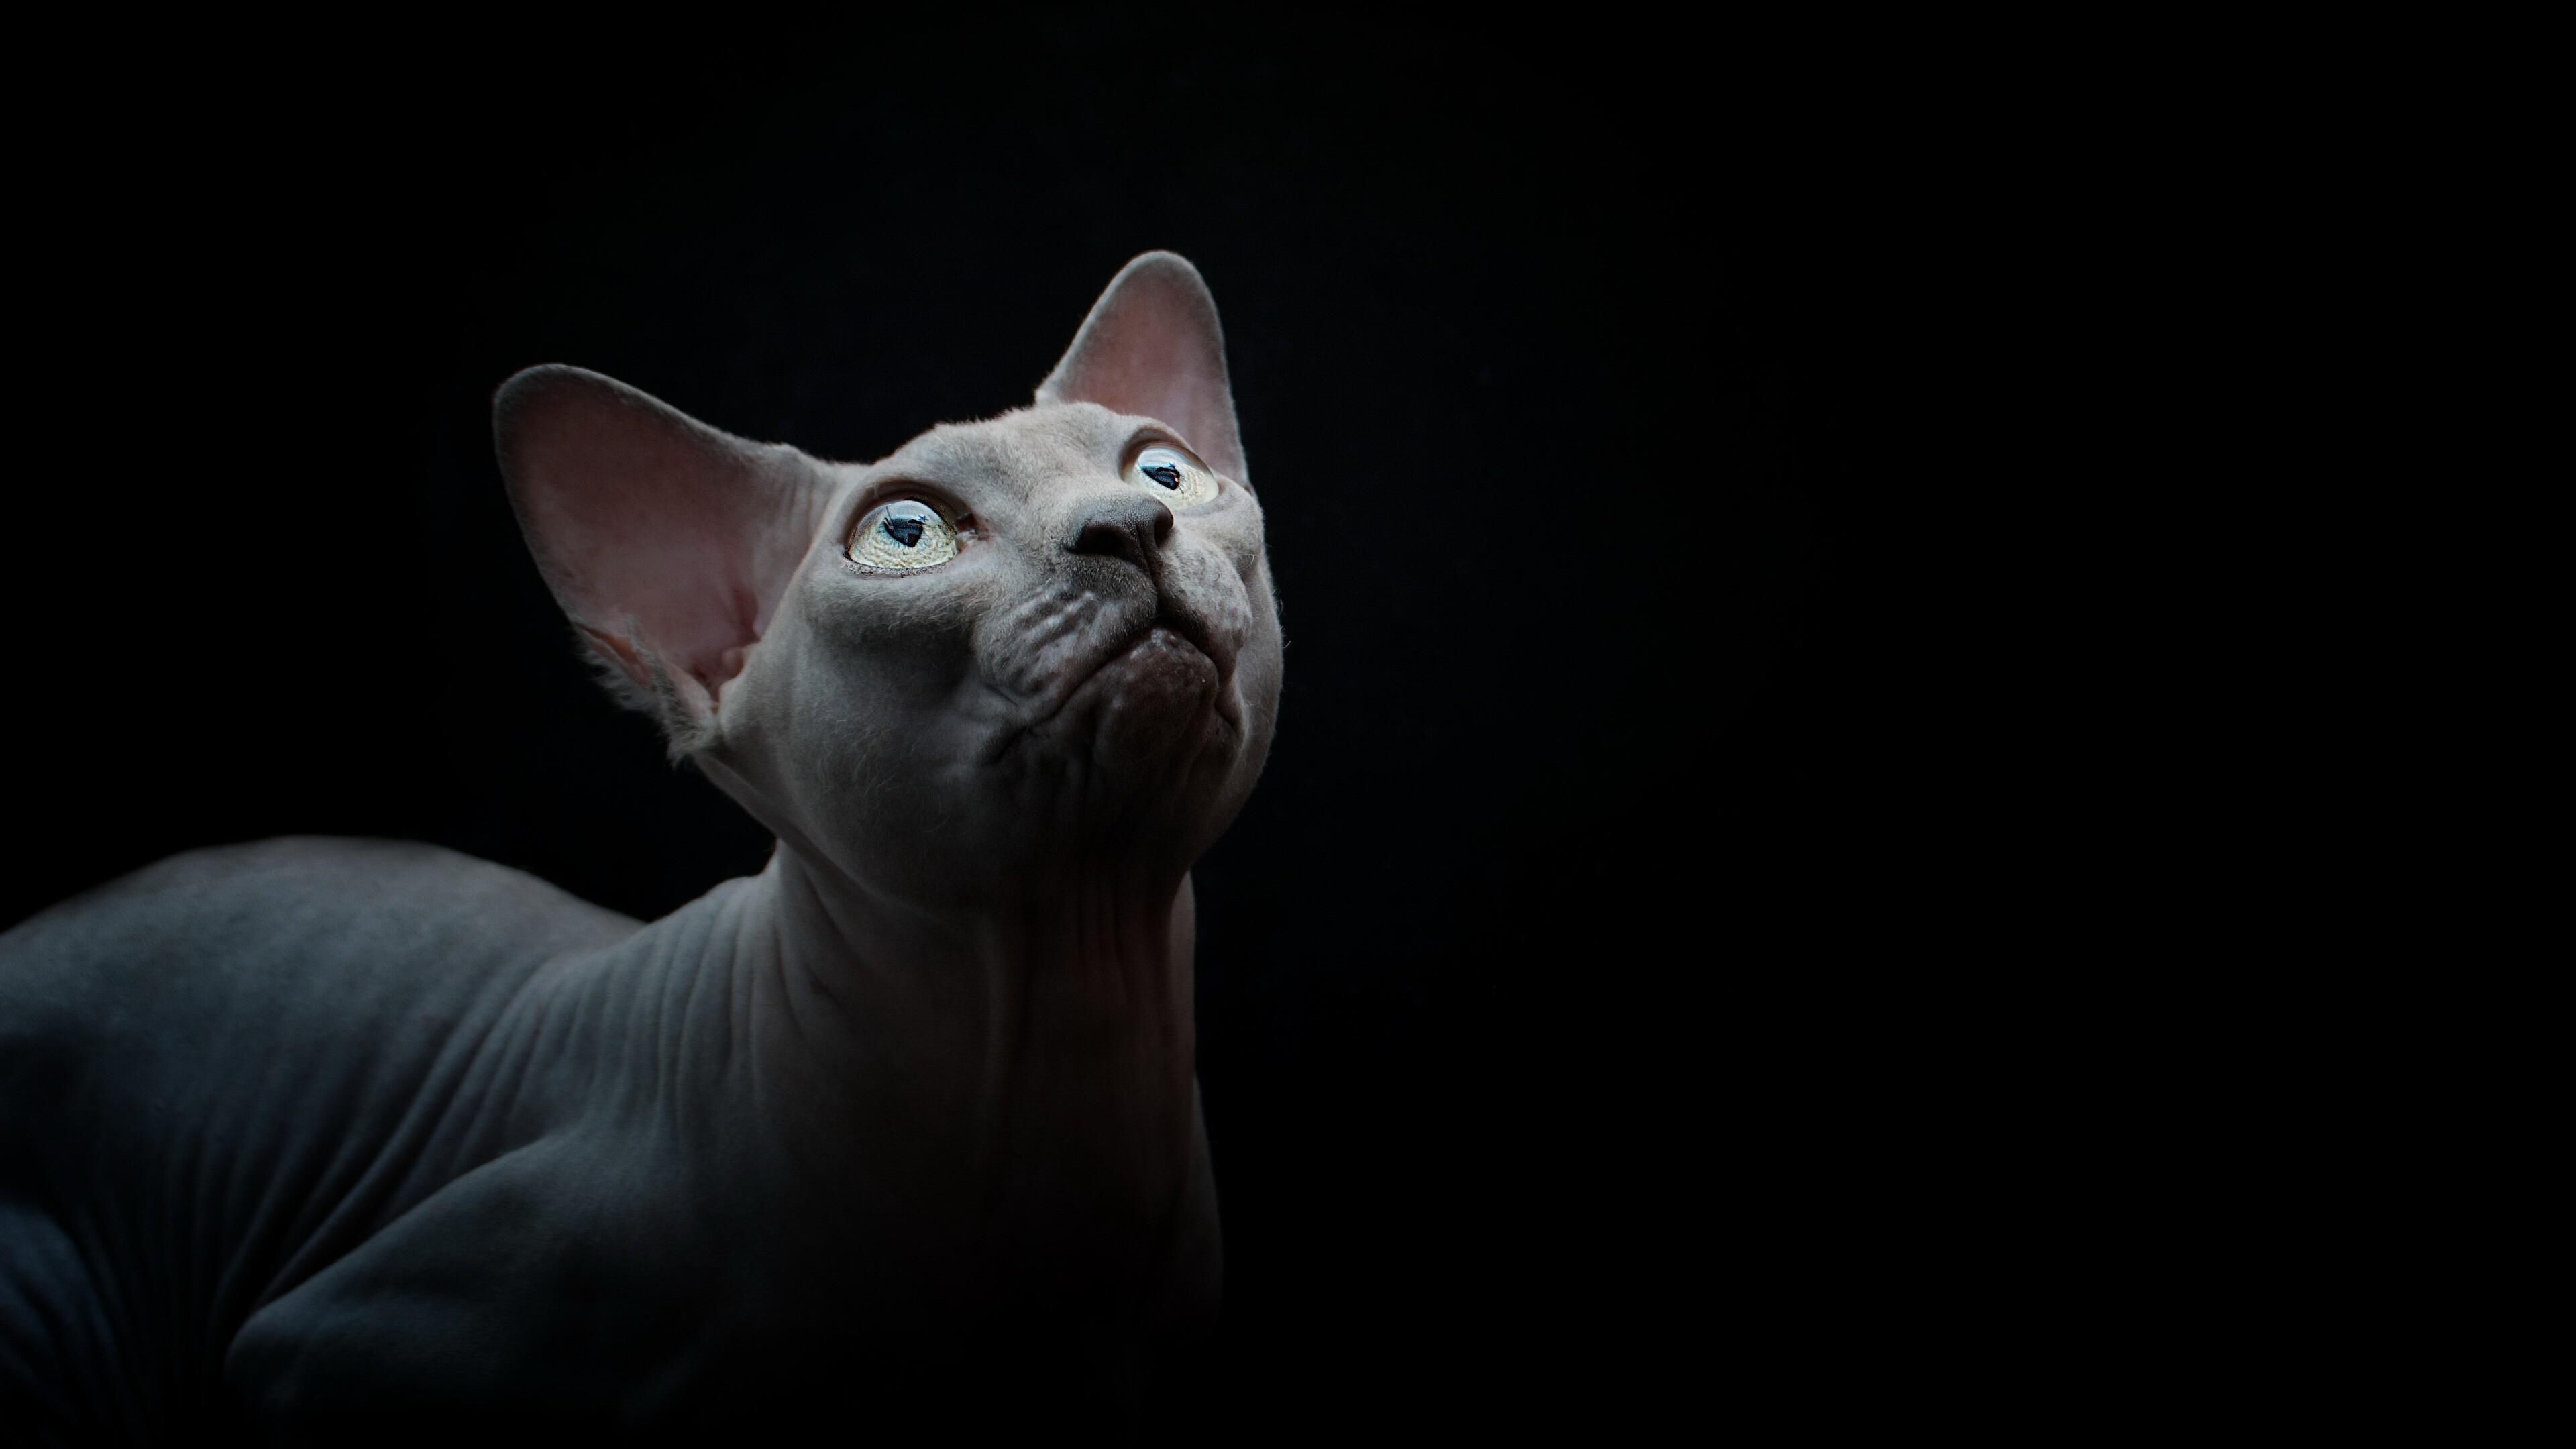 Sphynx: A breed of cat known for its lack of fur. 3840x2160 4K Wallpaper.